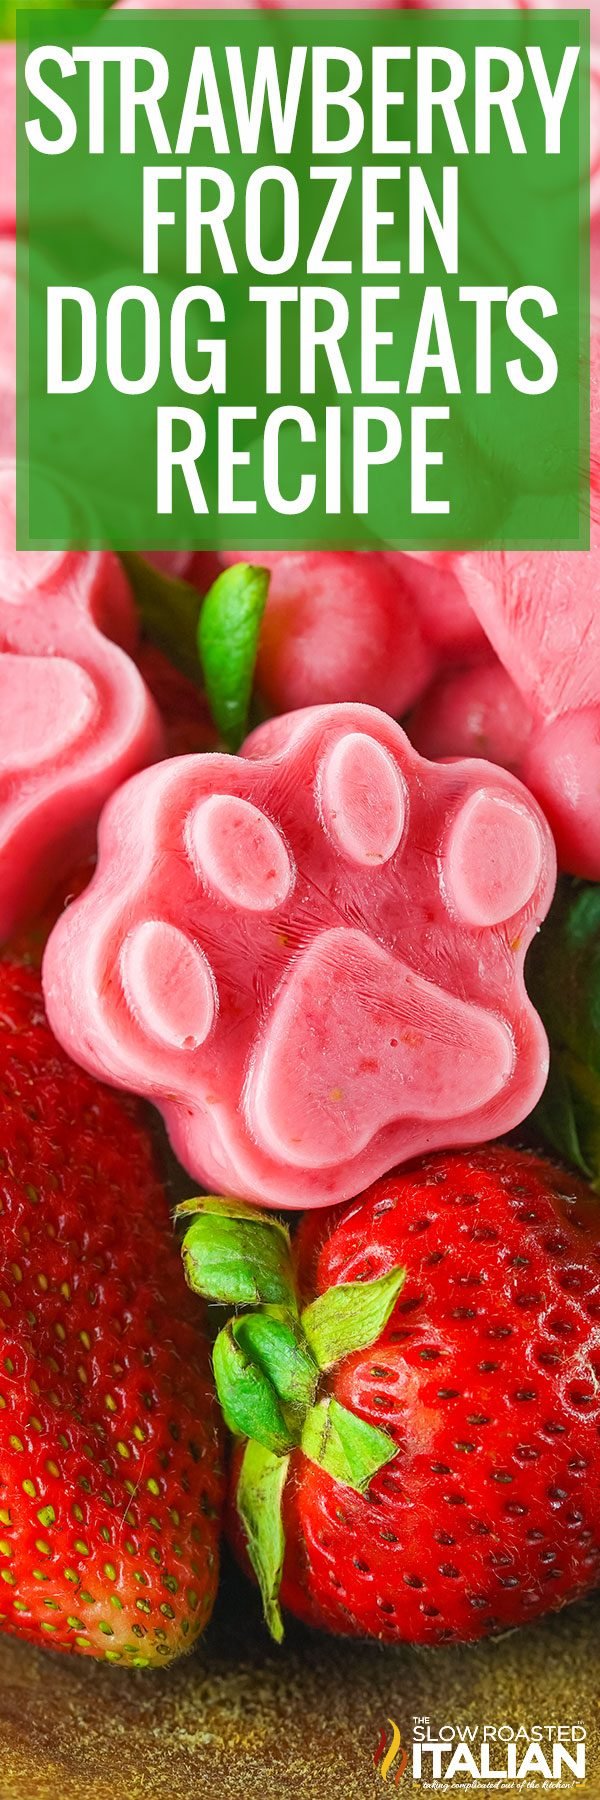 titled collage for strawberry frozen dog treats